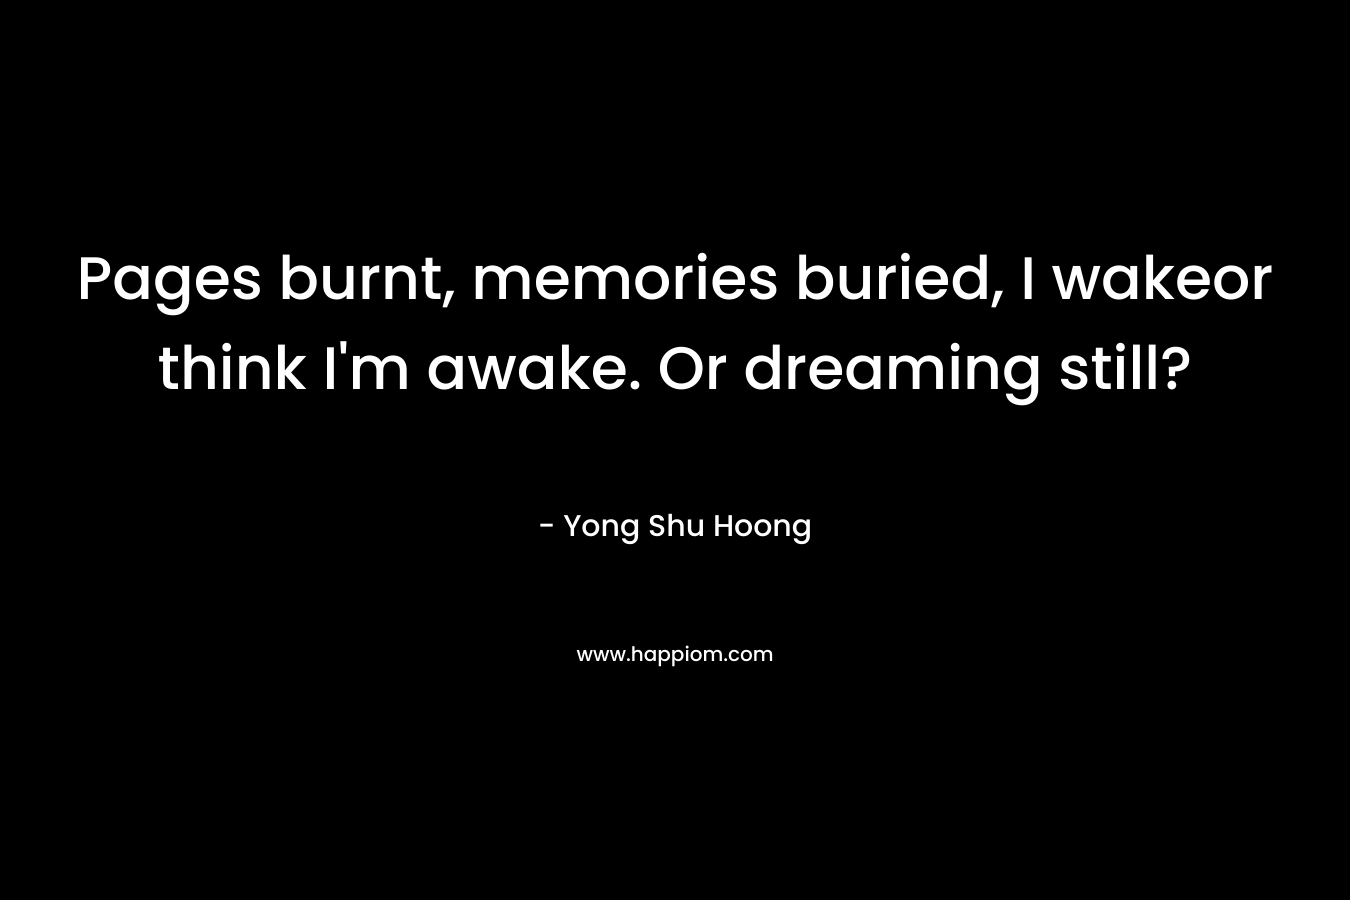 Pages burnt, memories buried, I wakeor think I'm awake. Or dreaming still?